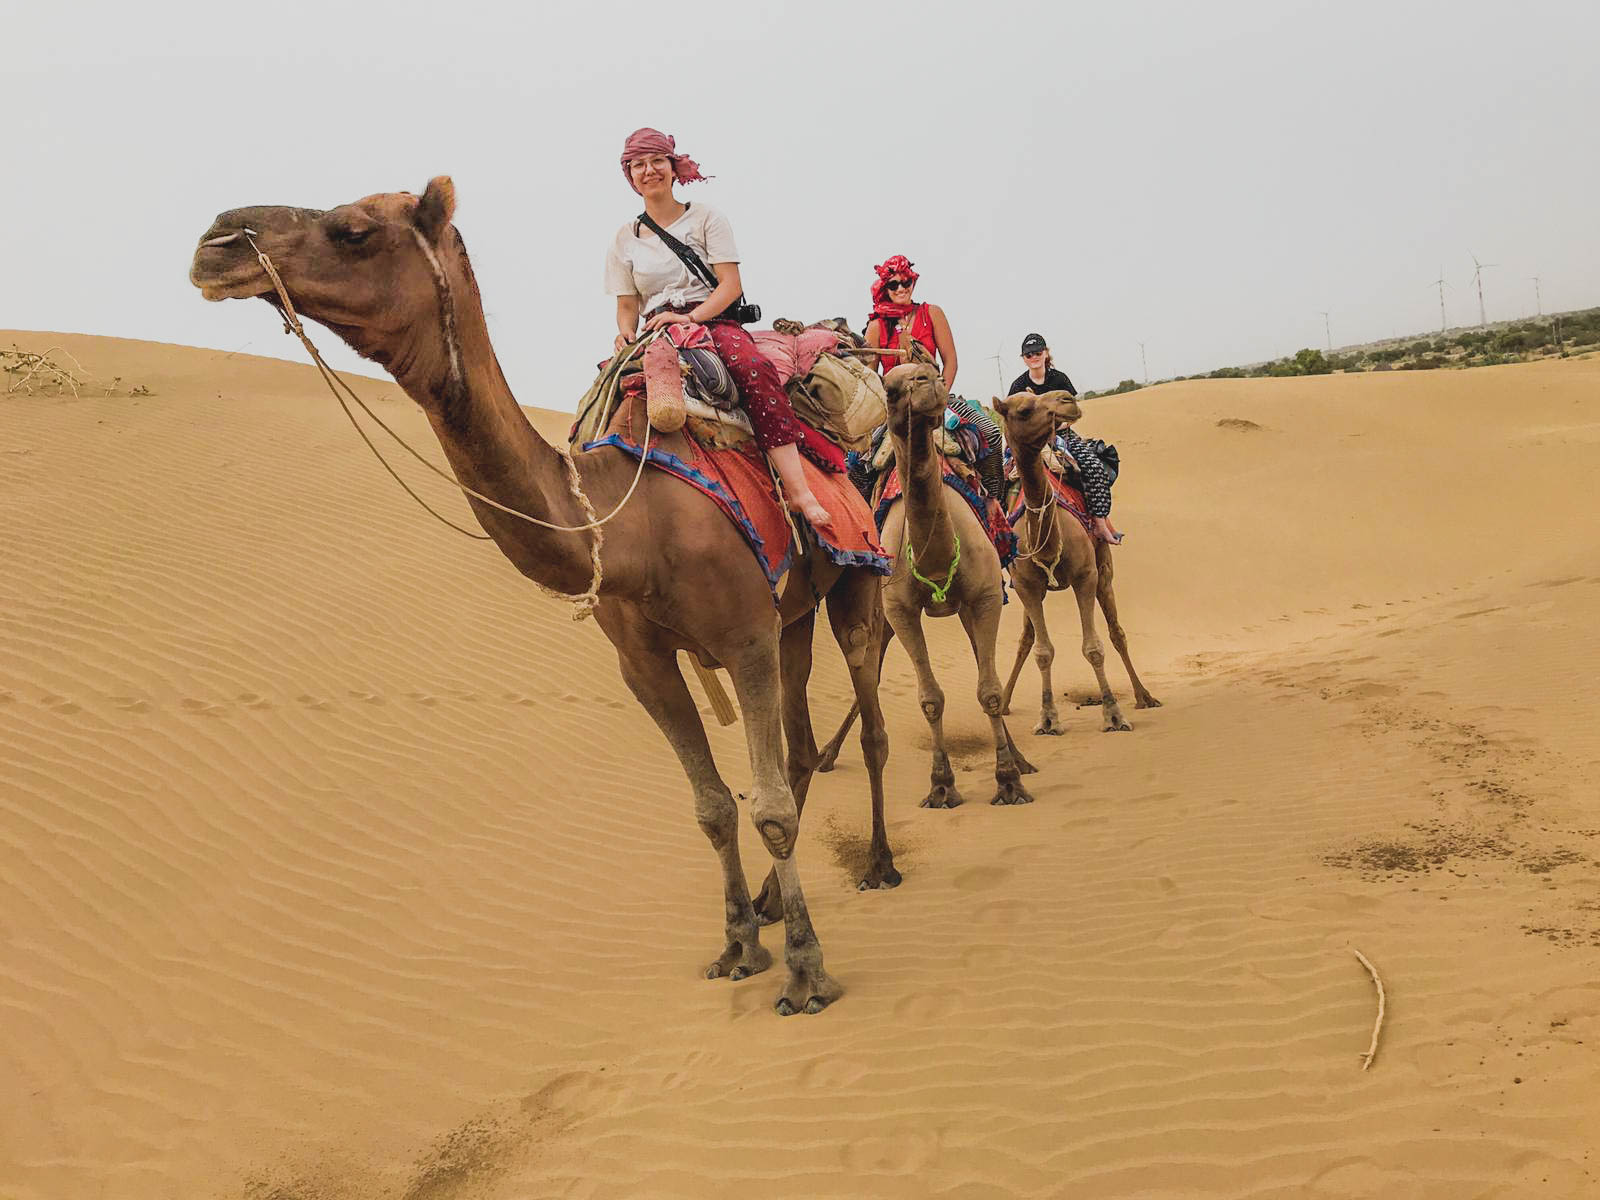 riding camels in India